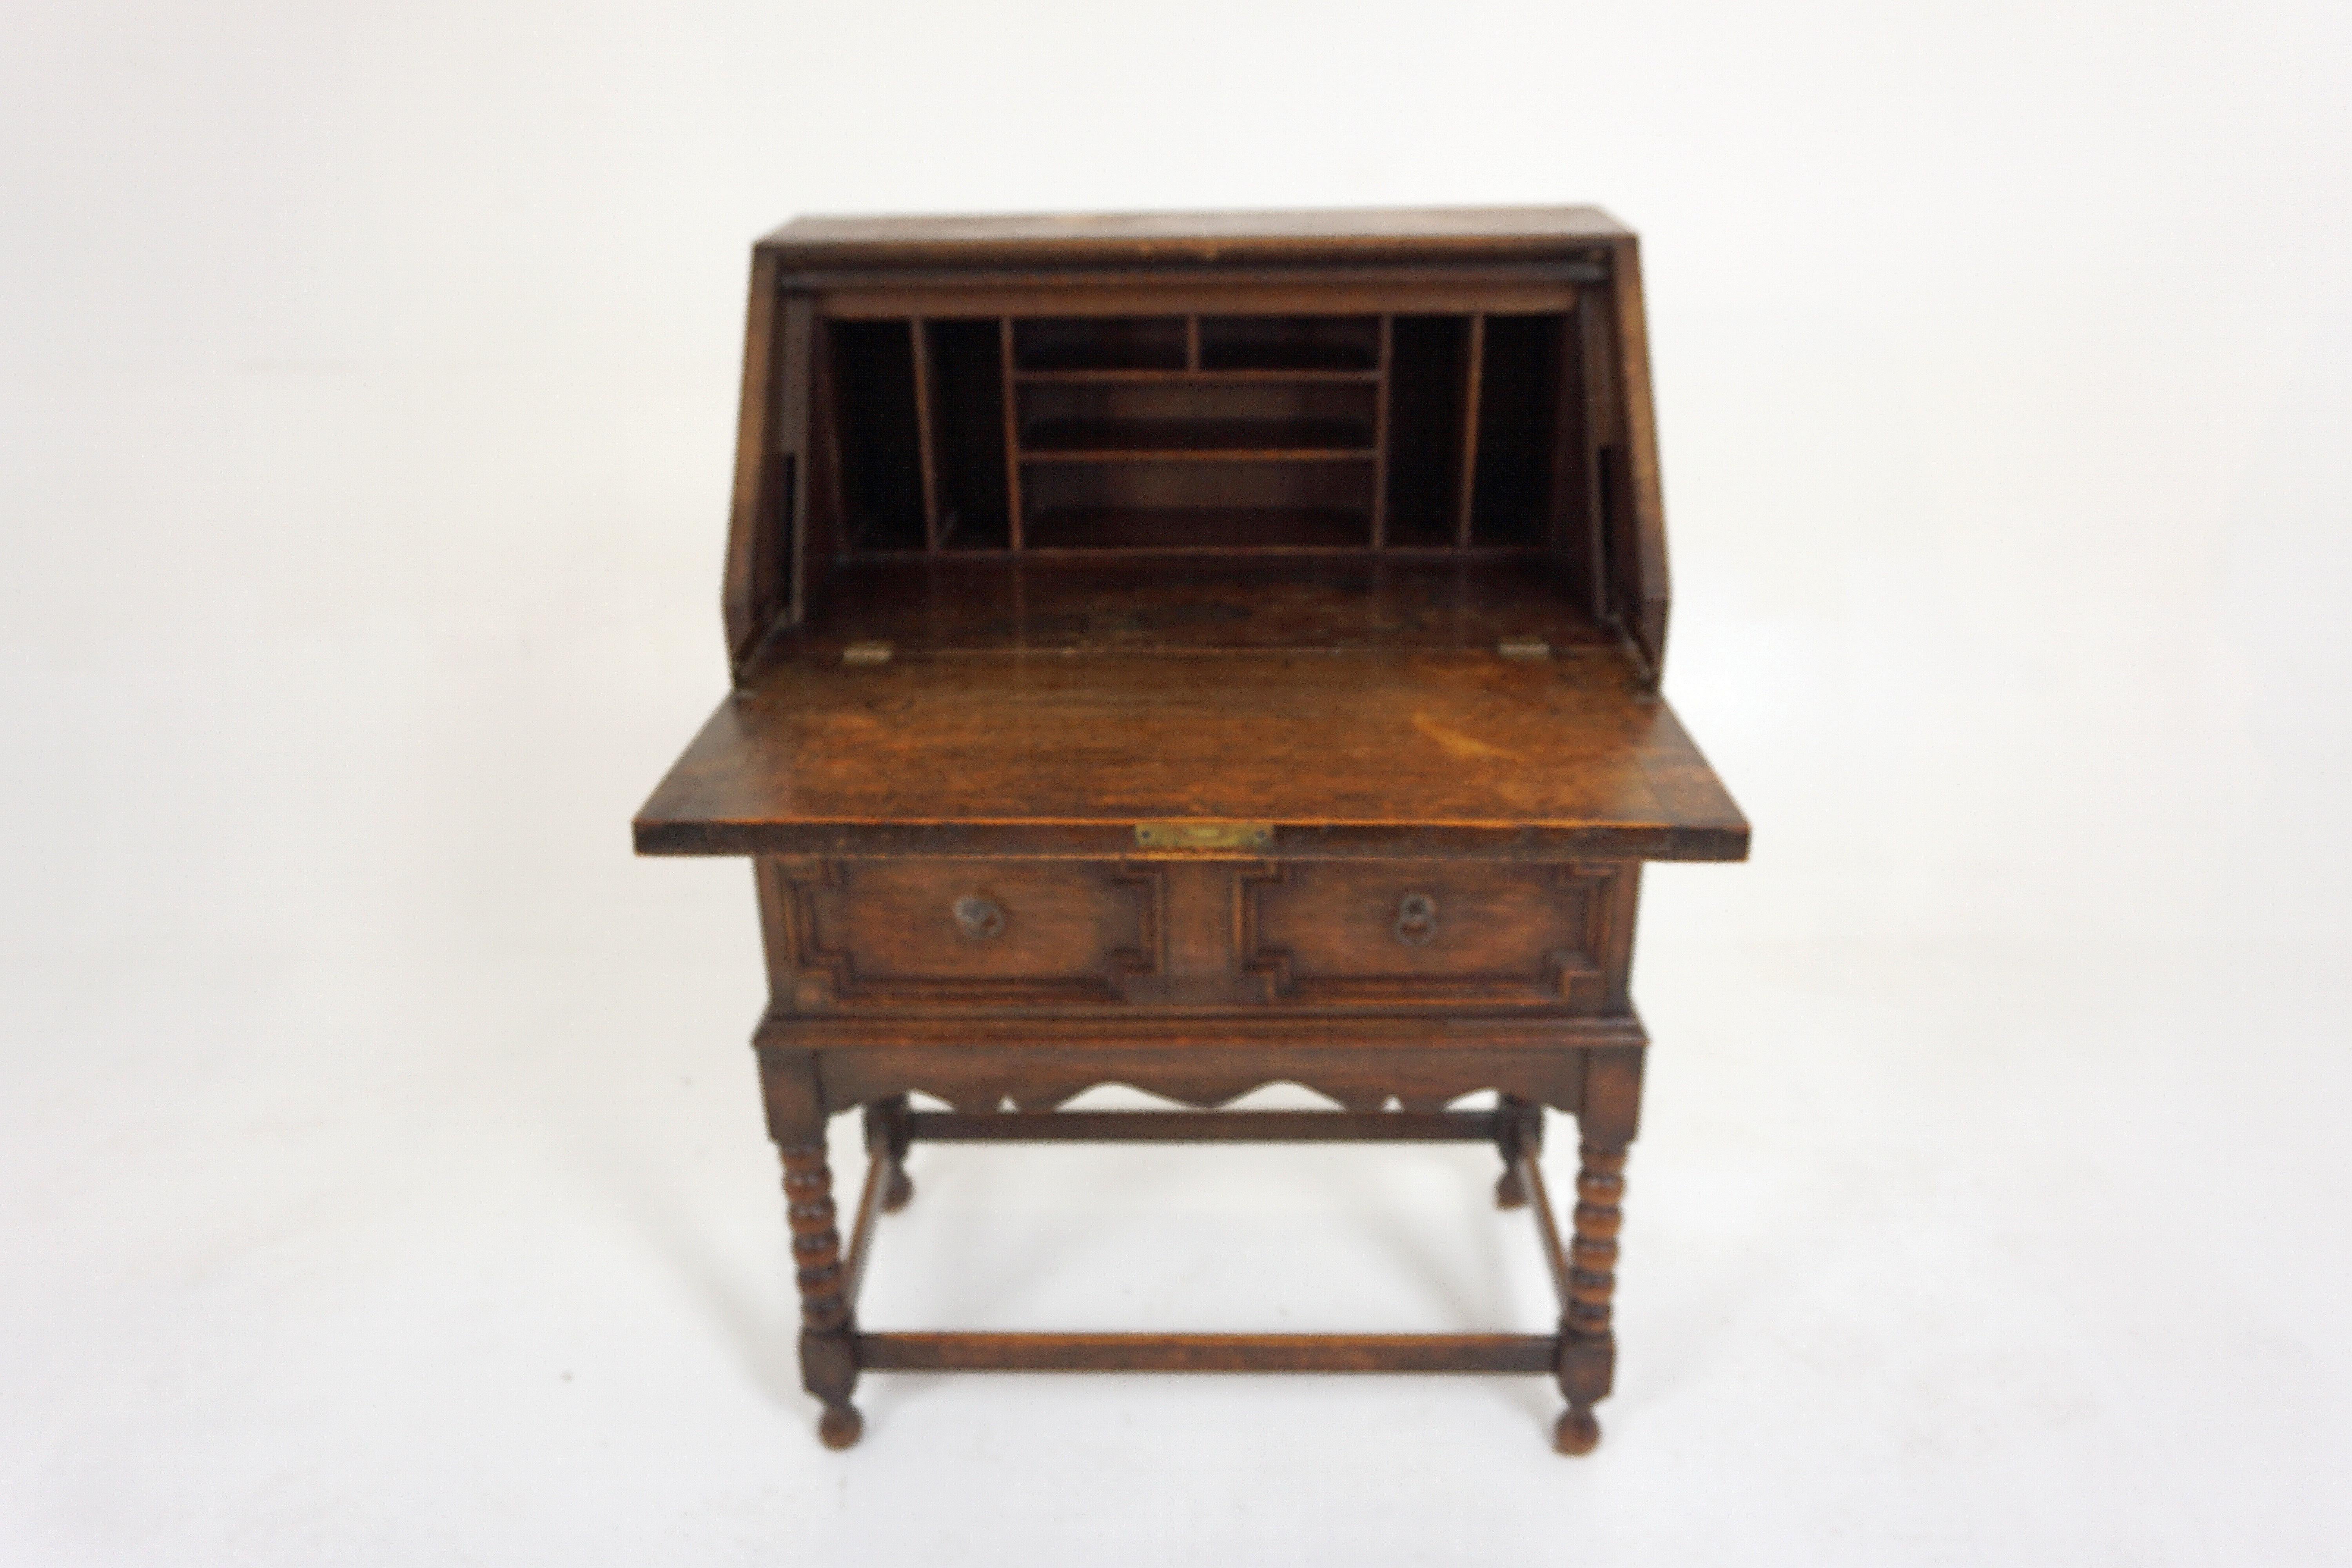 Antique Bobbin Leg Tiger oak drop front desk, Slant Front, Scotland 1920, H352

Scotland 1920
Solid Oak
Original Finish
Rectangular top
Having a fall front opening 
With cubby holes and writing surface above two graduating drawers
Shaped skirt